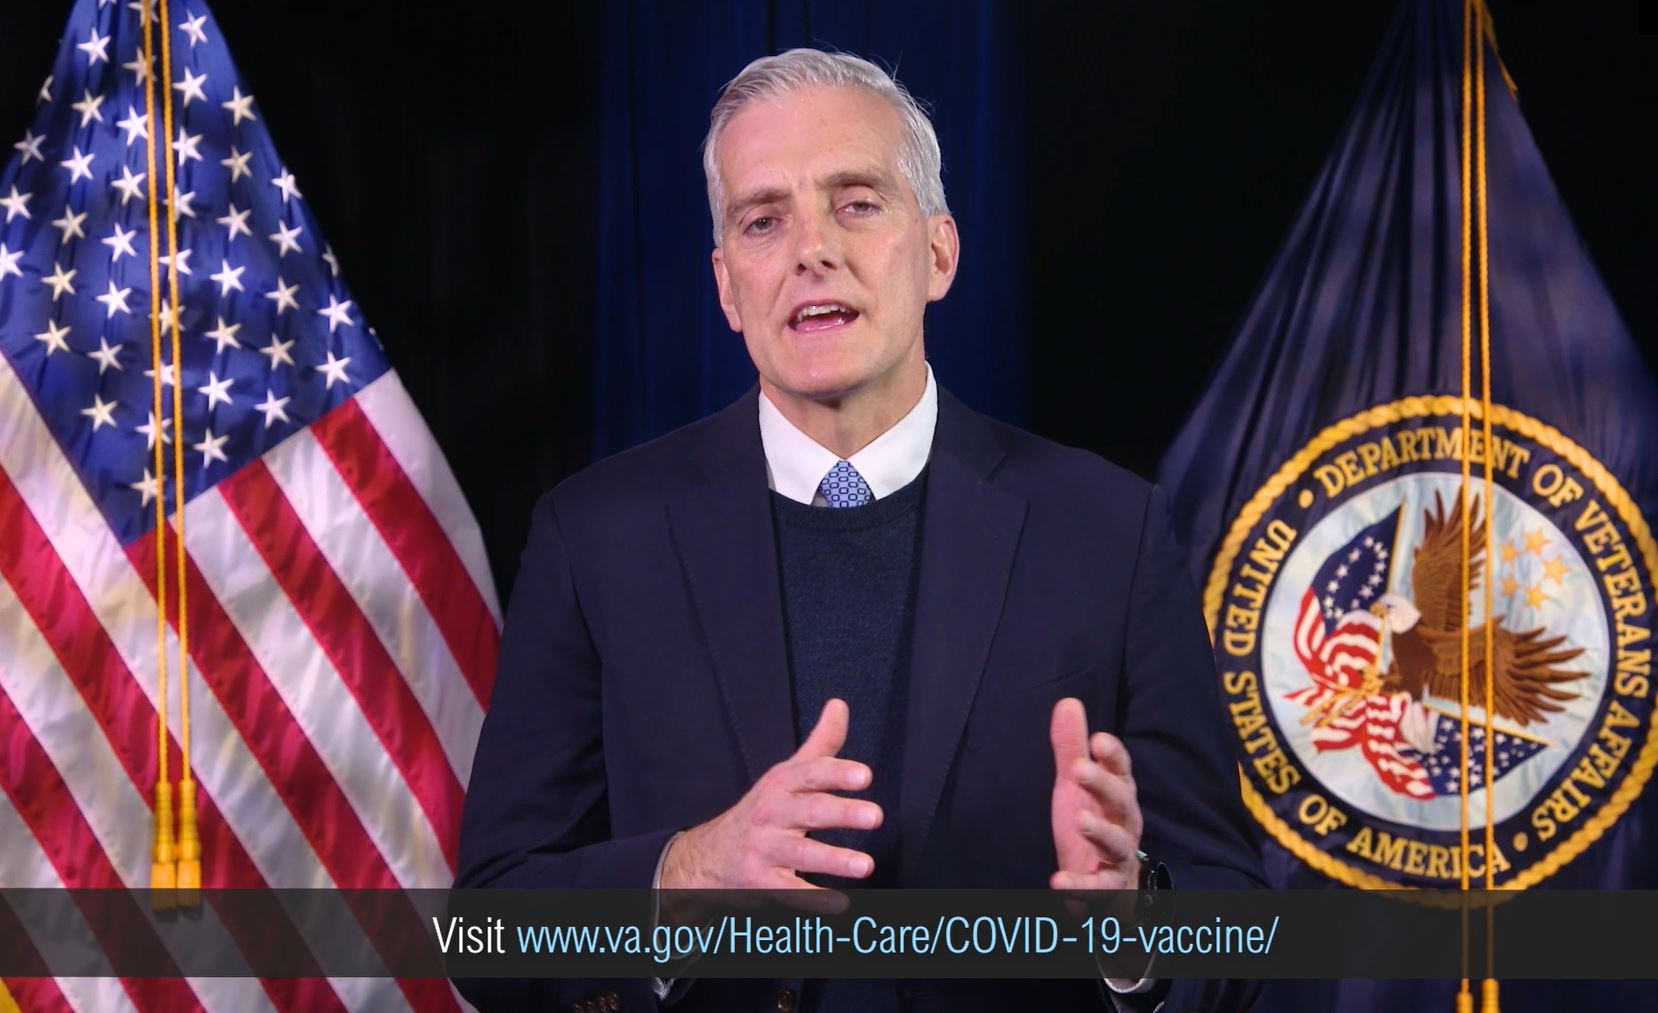 Getting vaccinated against COVID-19 is the best way to protect others and health care workers from hospitalization and death, VA Secretary Denis McDonough said Jan. 19 at a Blue Star Families online forum.